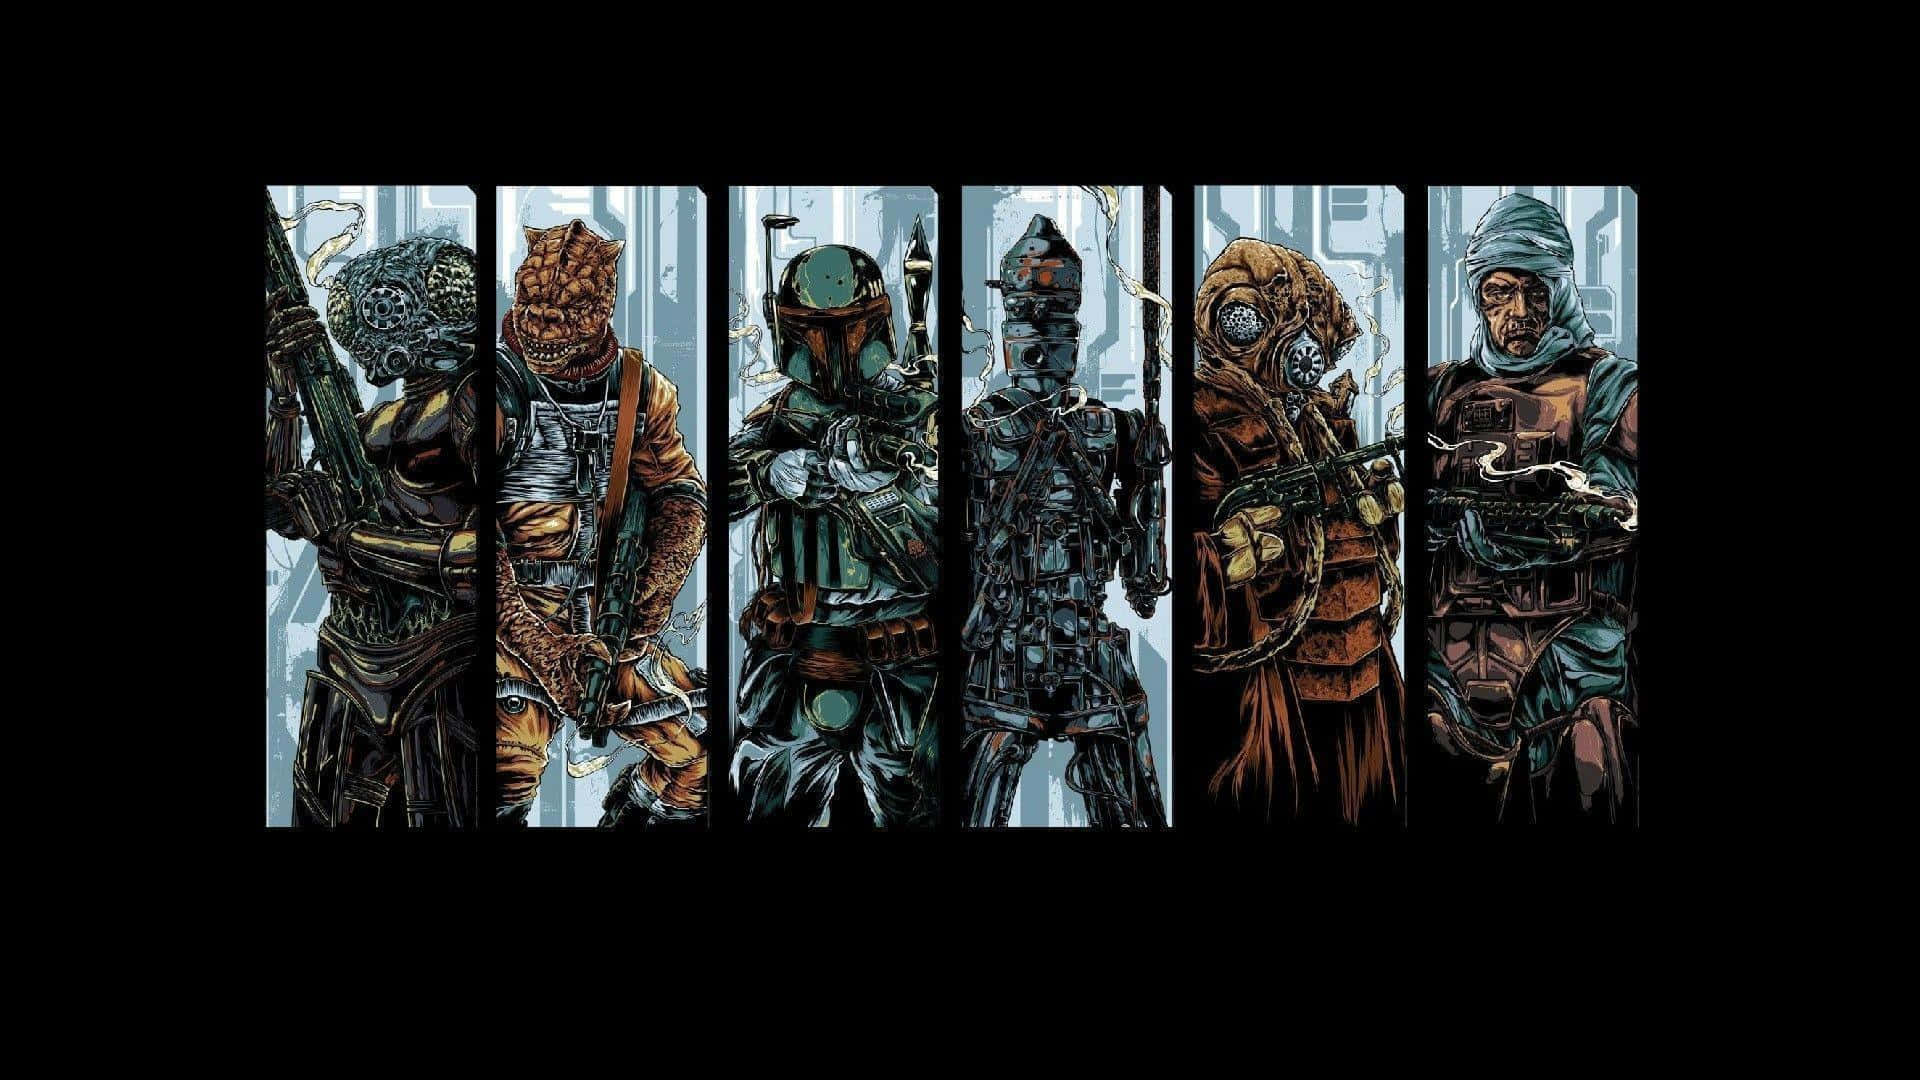 Join the fight for justice in “The War Of The Bounty Hunters” Wallpaper